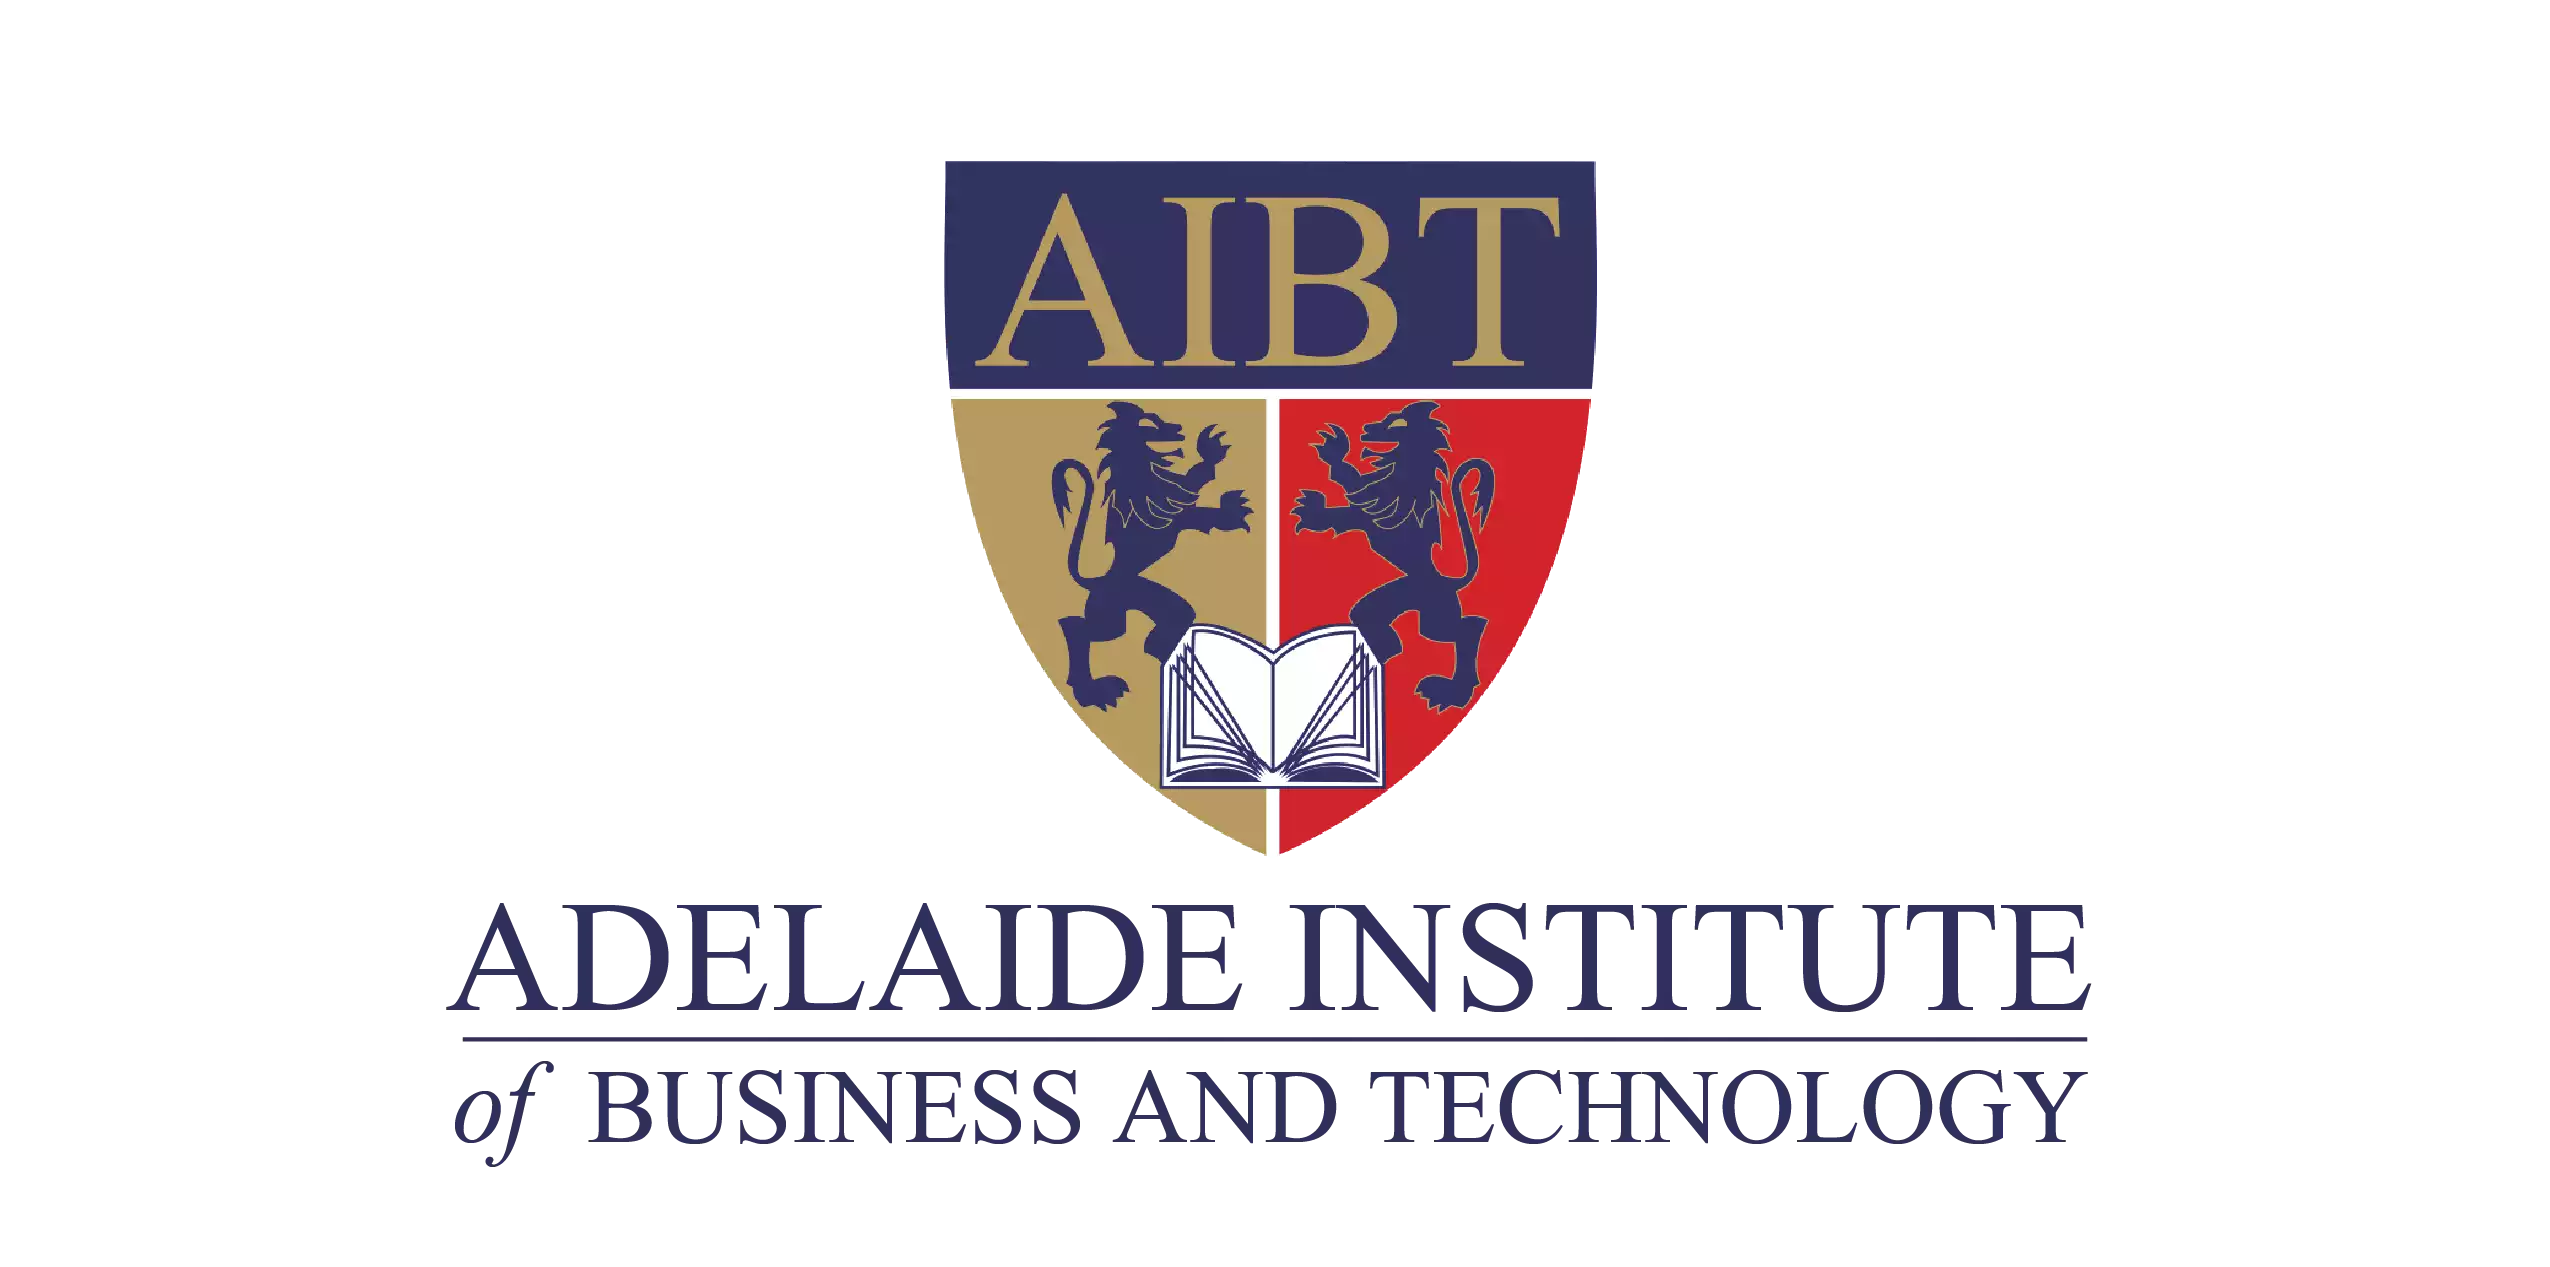 Adelaide Institute of Business & Technology (AIBT) Scholarship programs